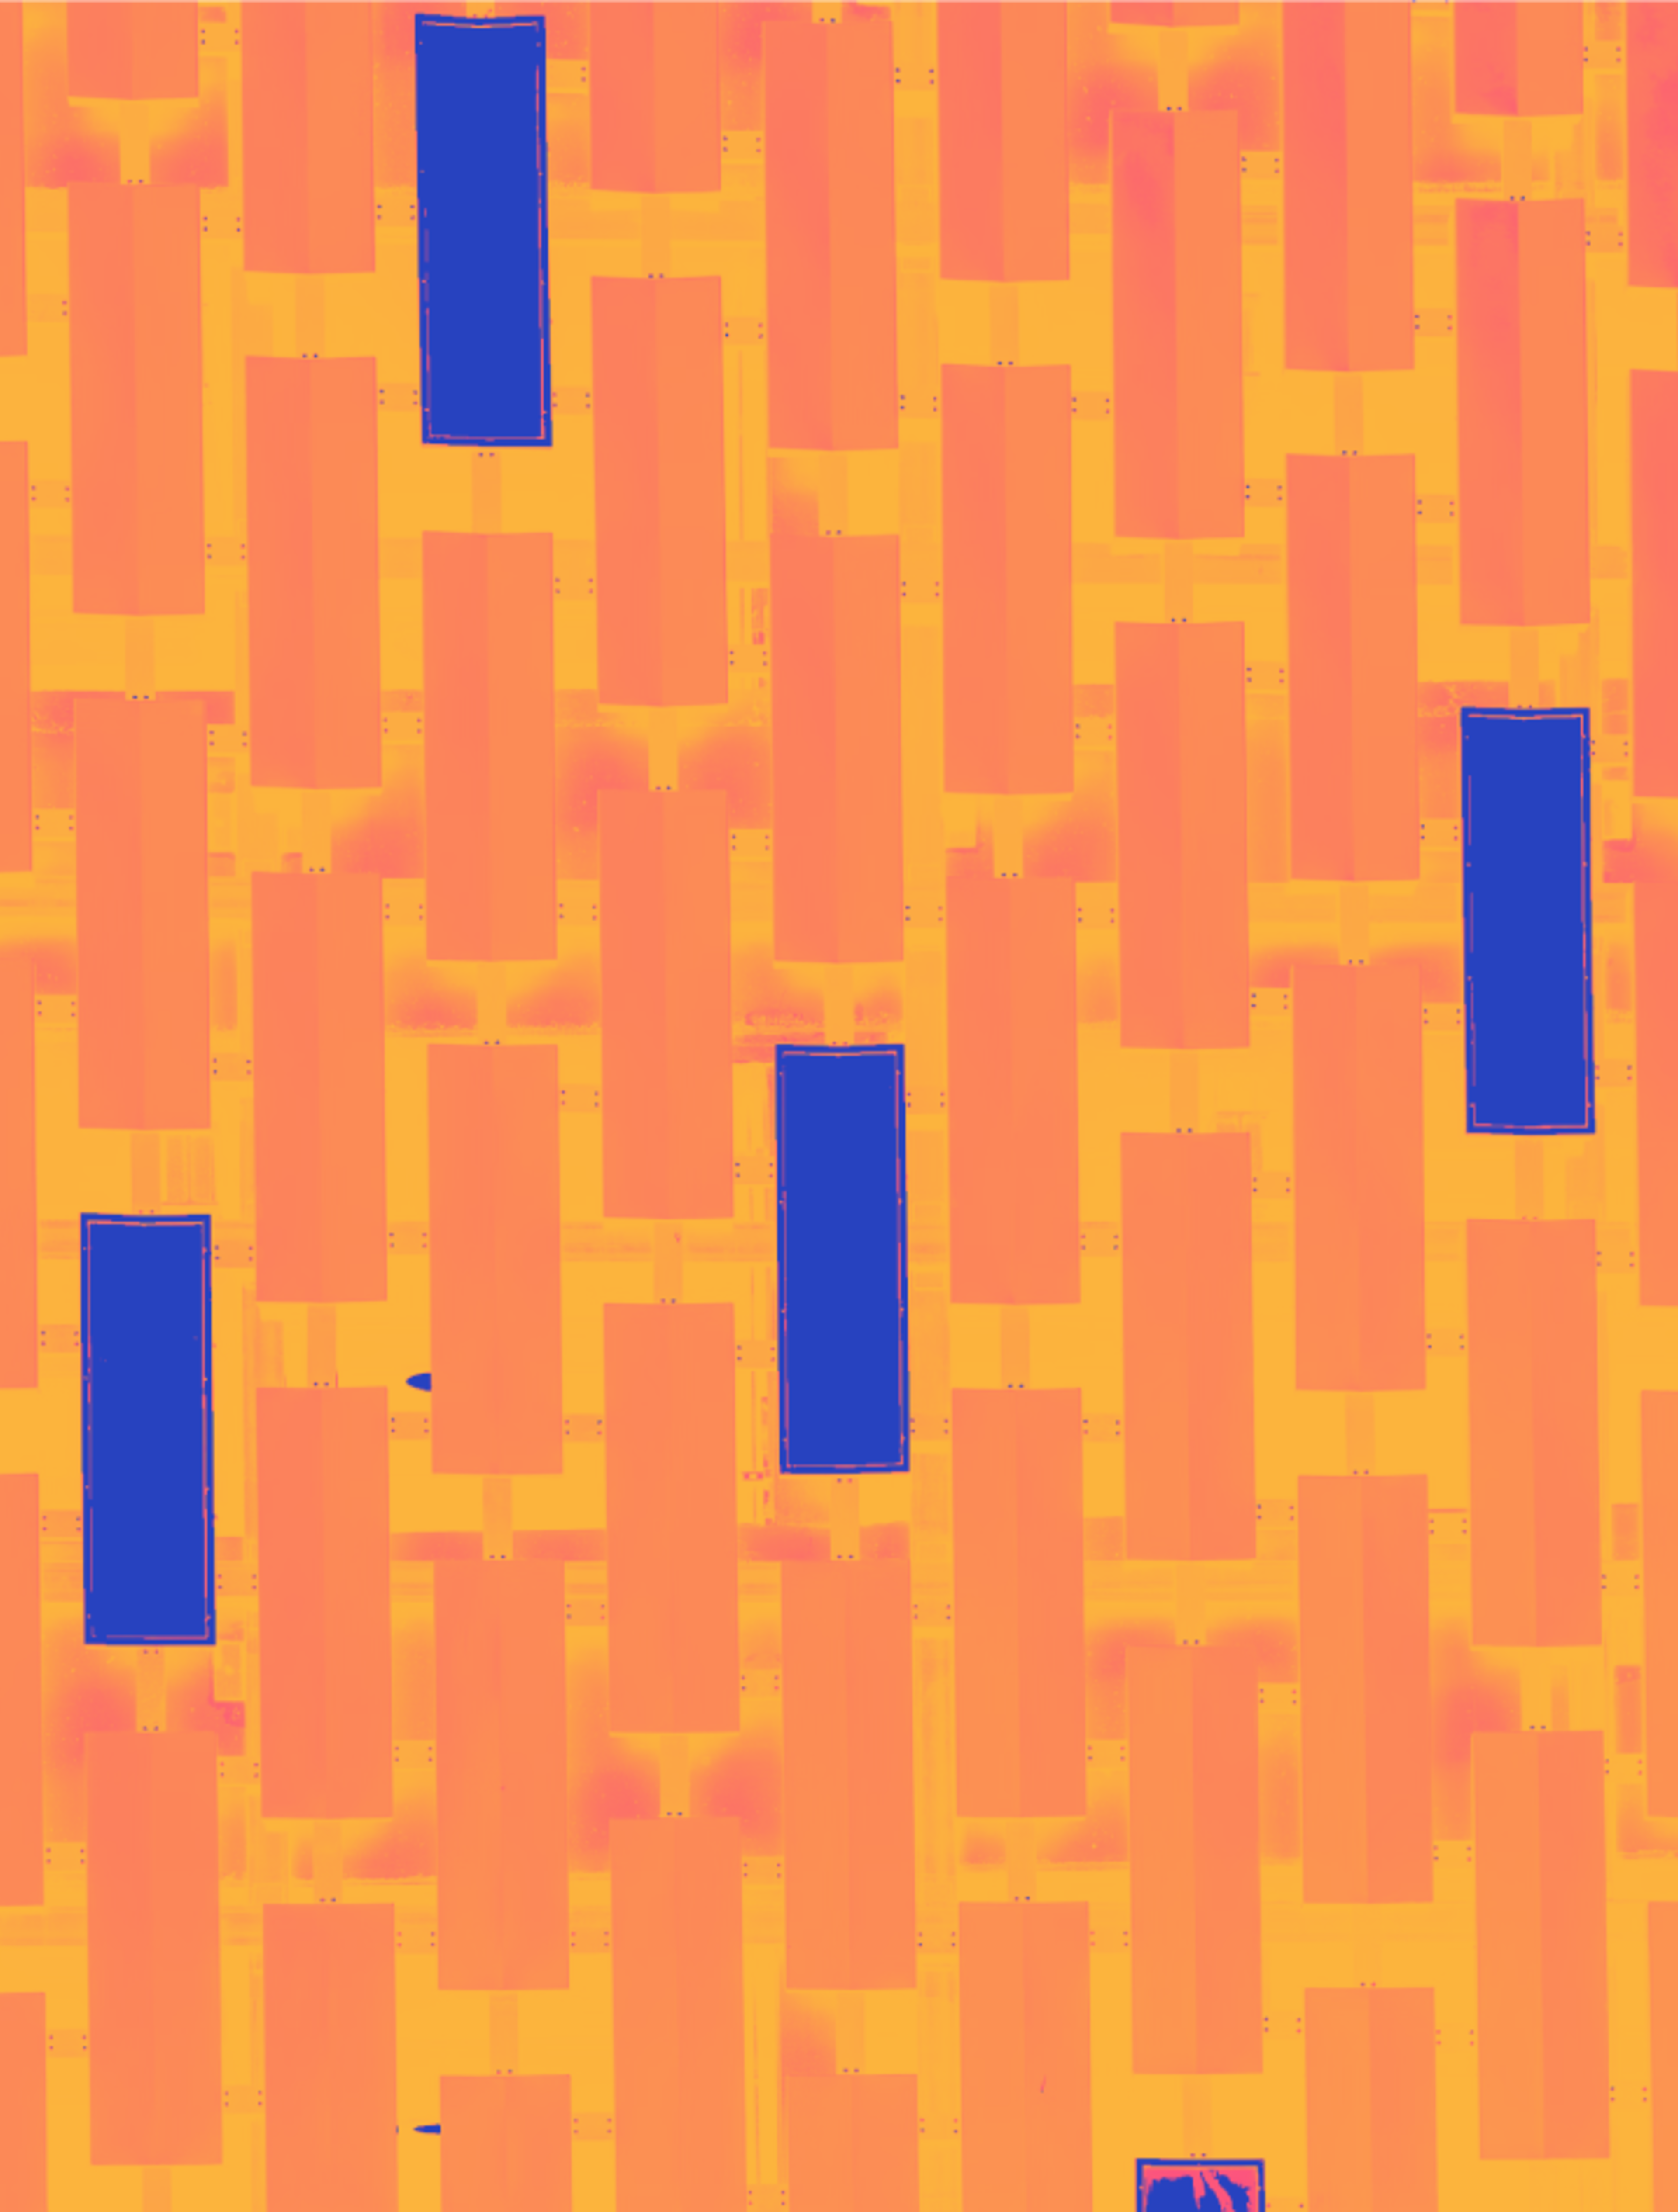 An abstract pattern of blocks with several highlighted in blue.